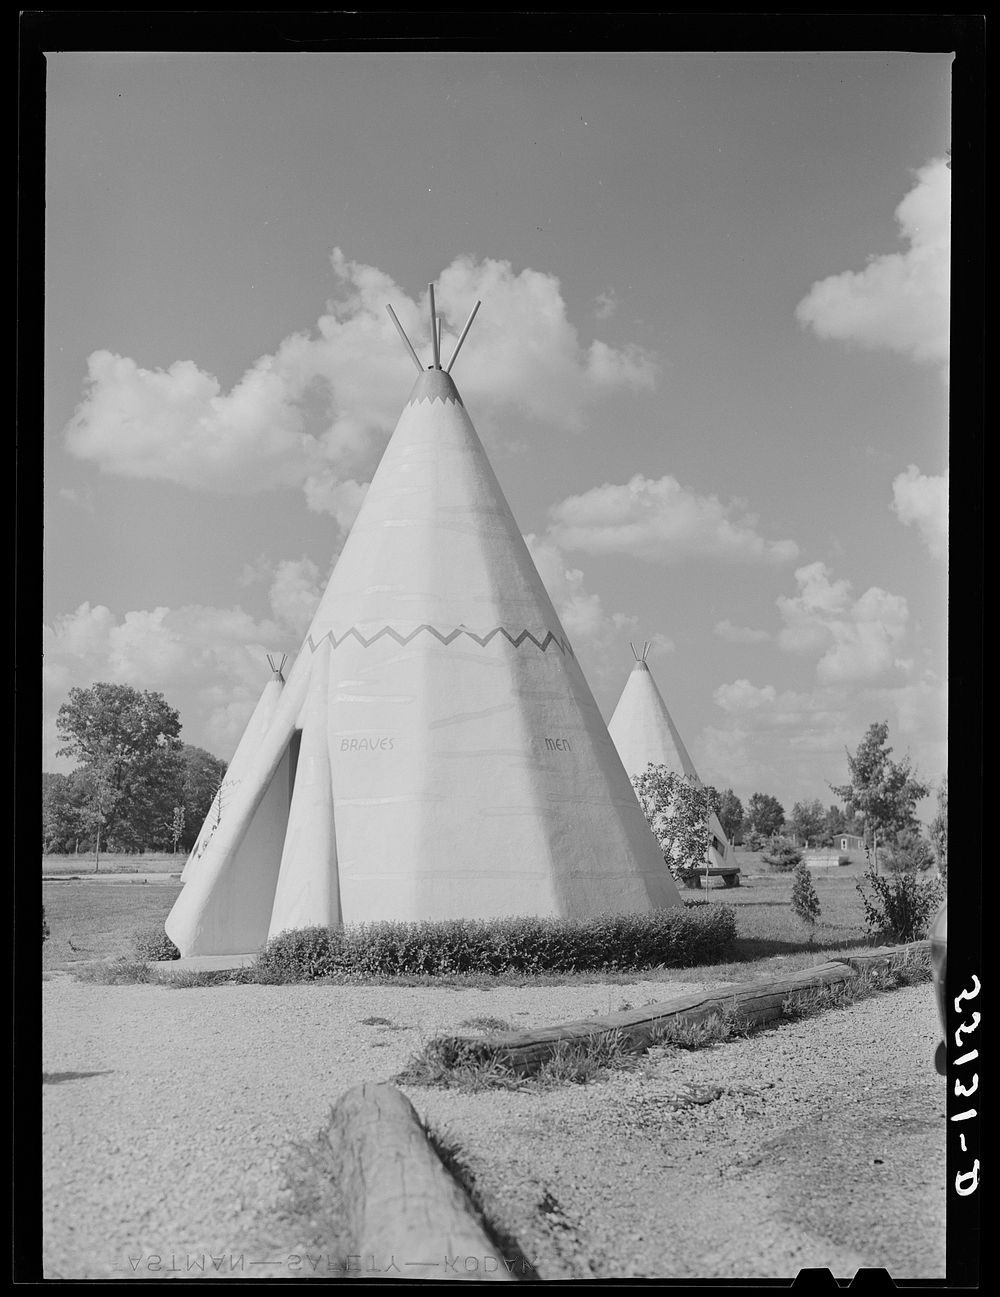 Cabins imitating Indian teepee for tourists along highway south of Bardstown, Kentucky. Sourced from the Library of Congress.